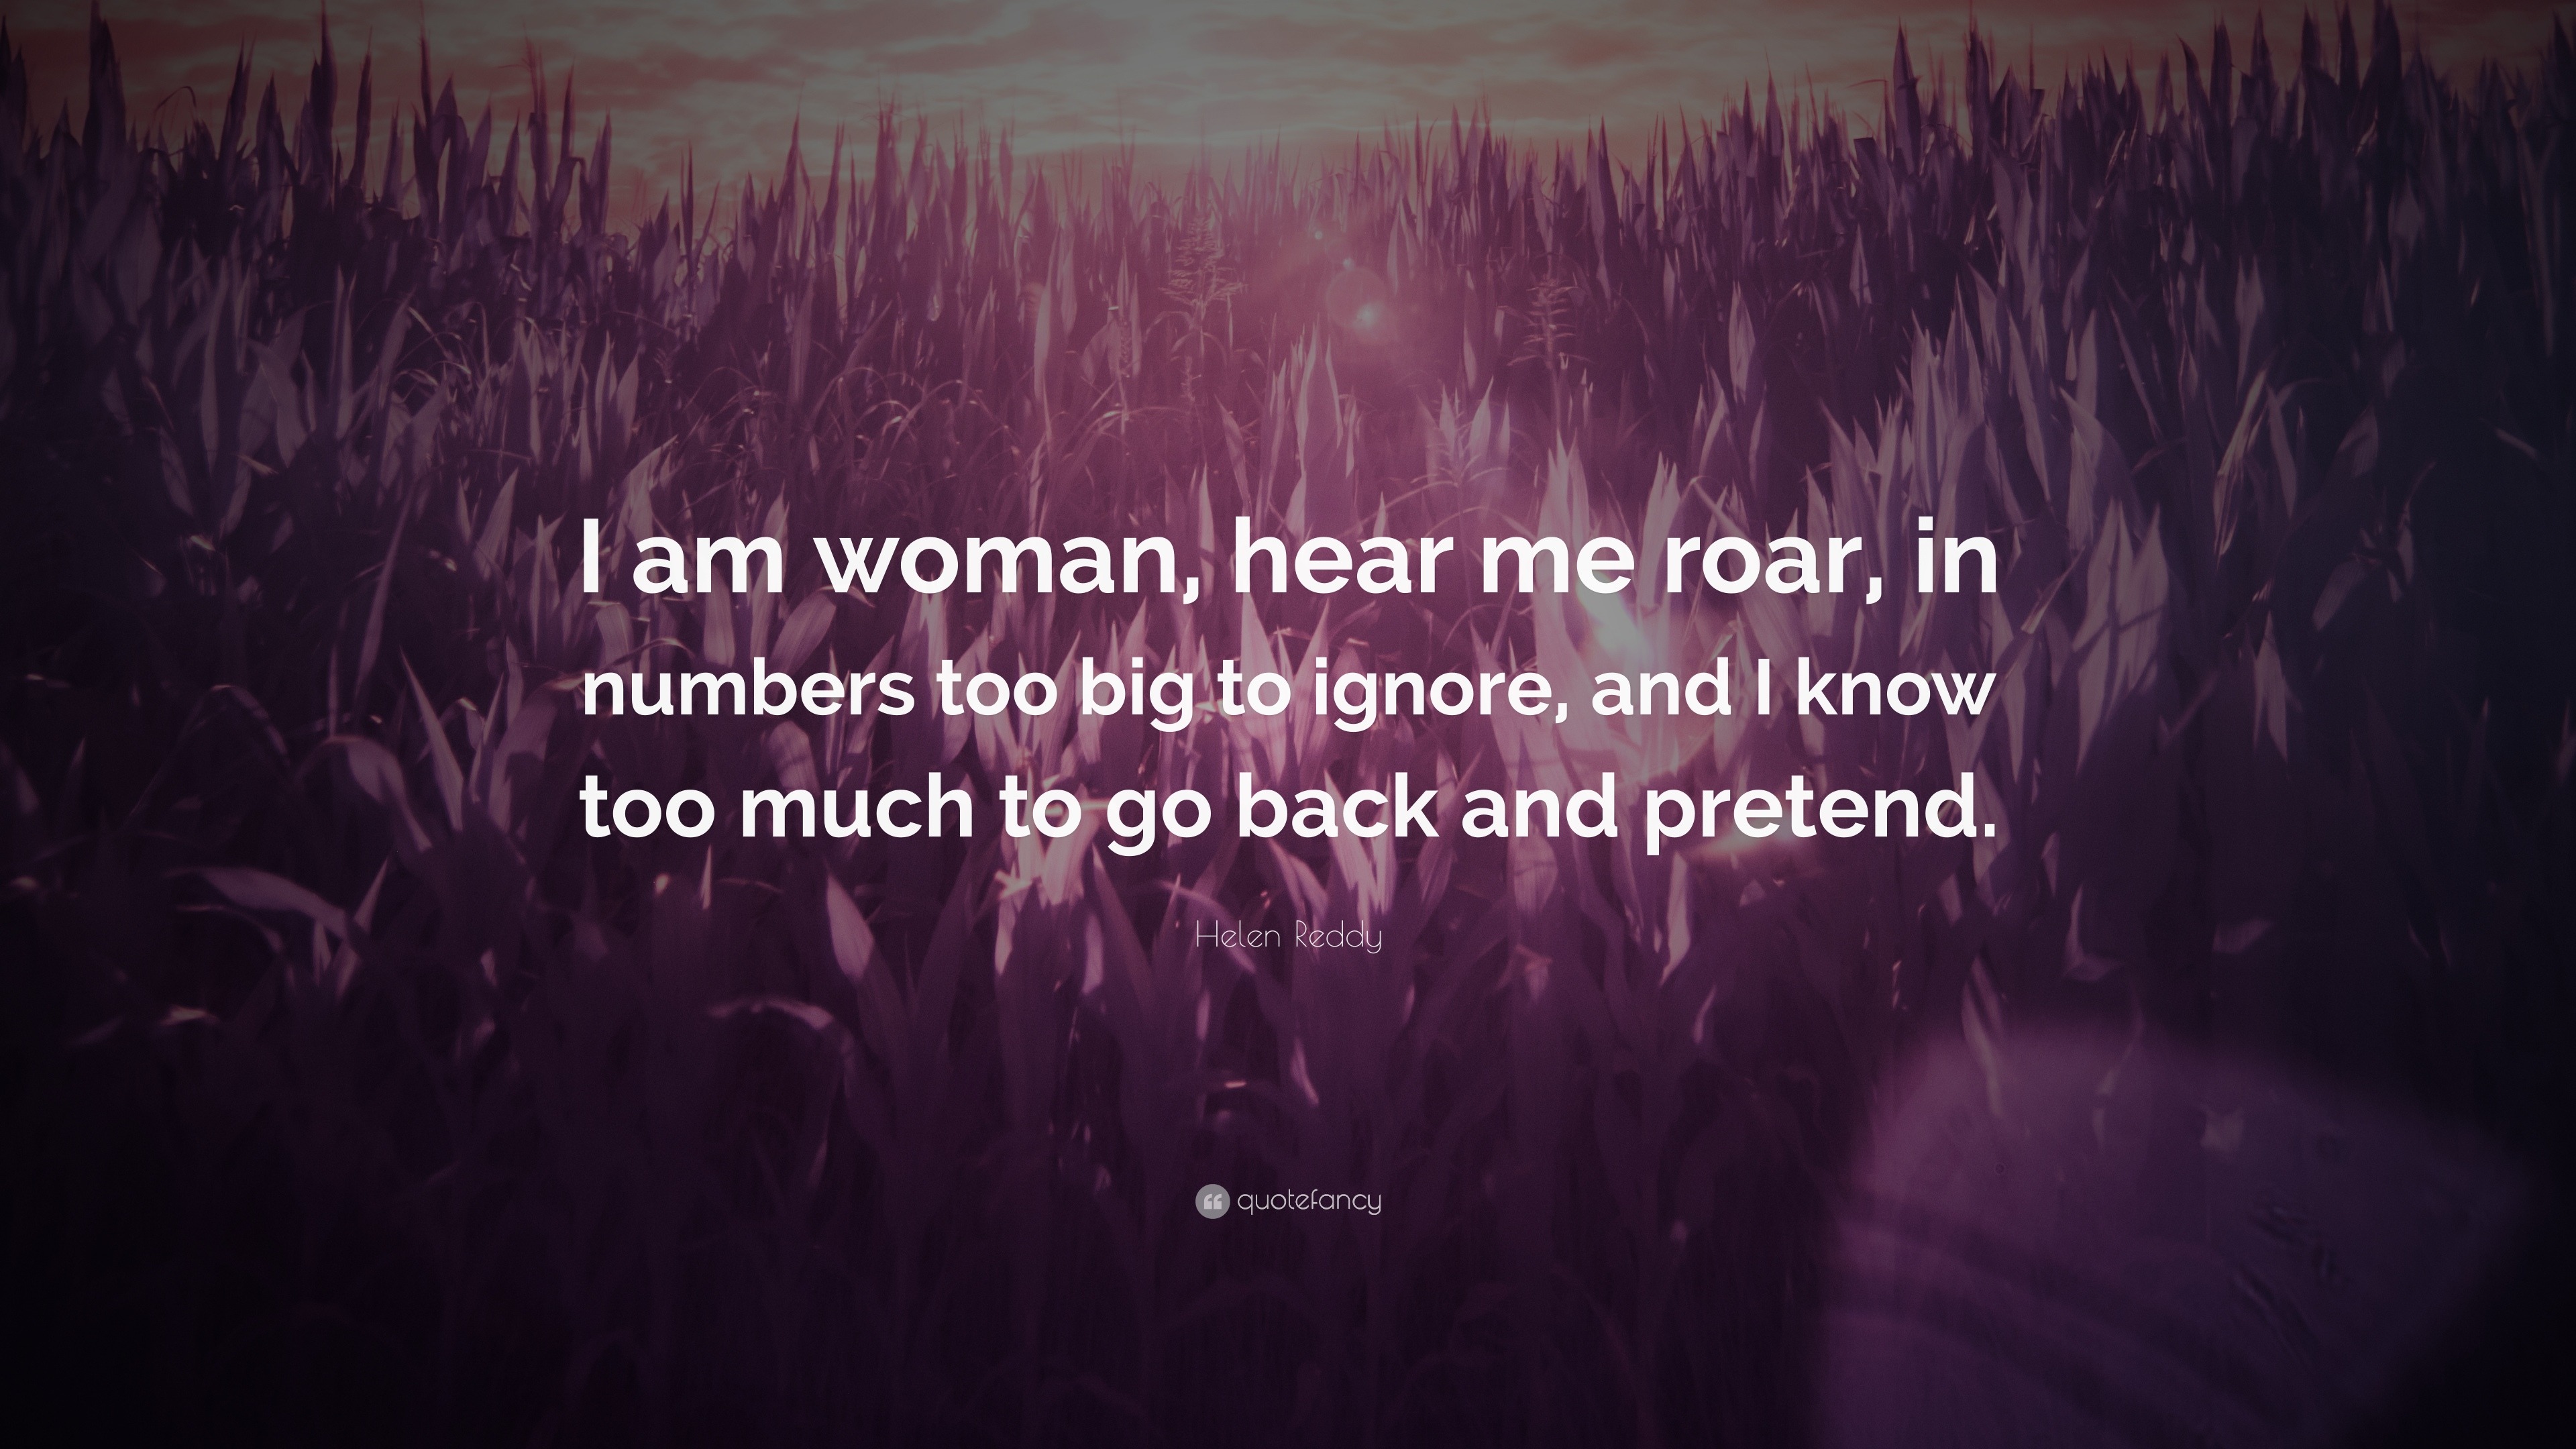 Helen Reddy Quote: “I am woman, hear me roar, in numbers too big to ignore,  and